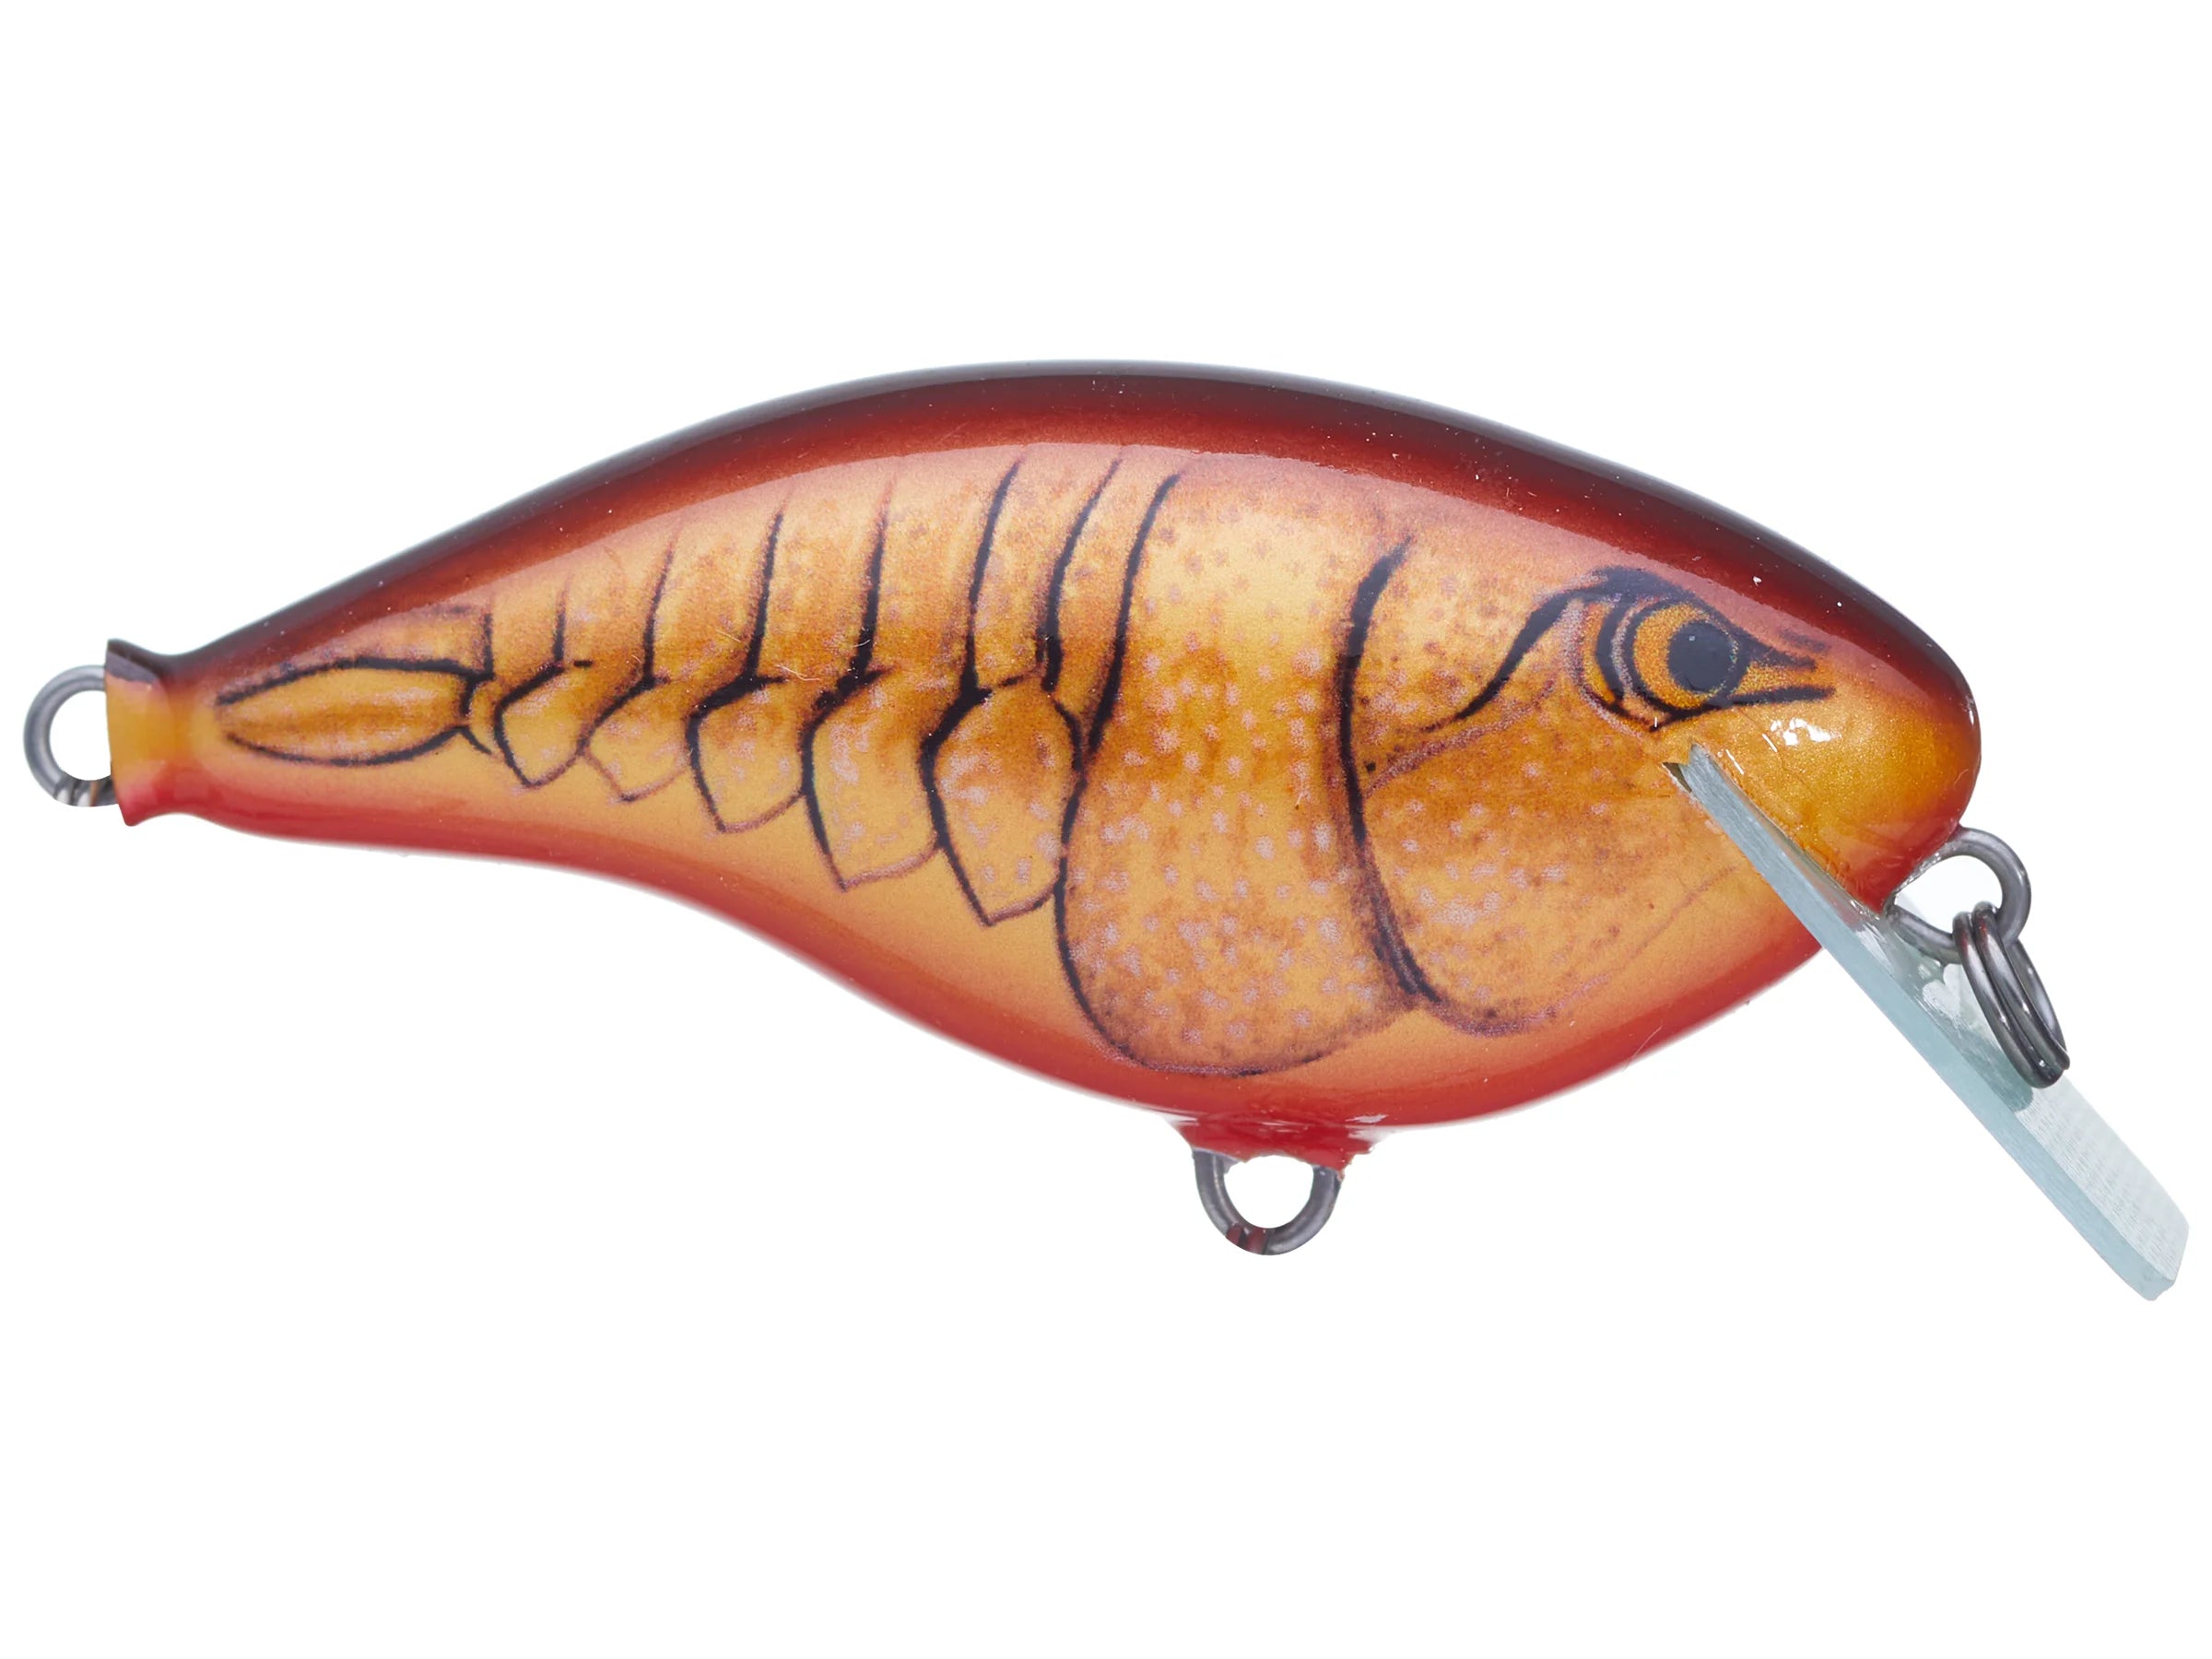 Buy Fishing Supplies Online, Fishing Gear Online, Copperstate Tackle